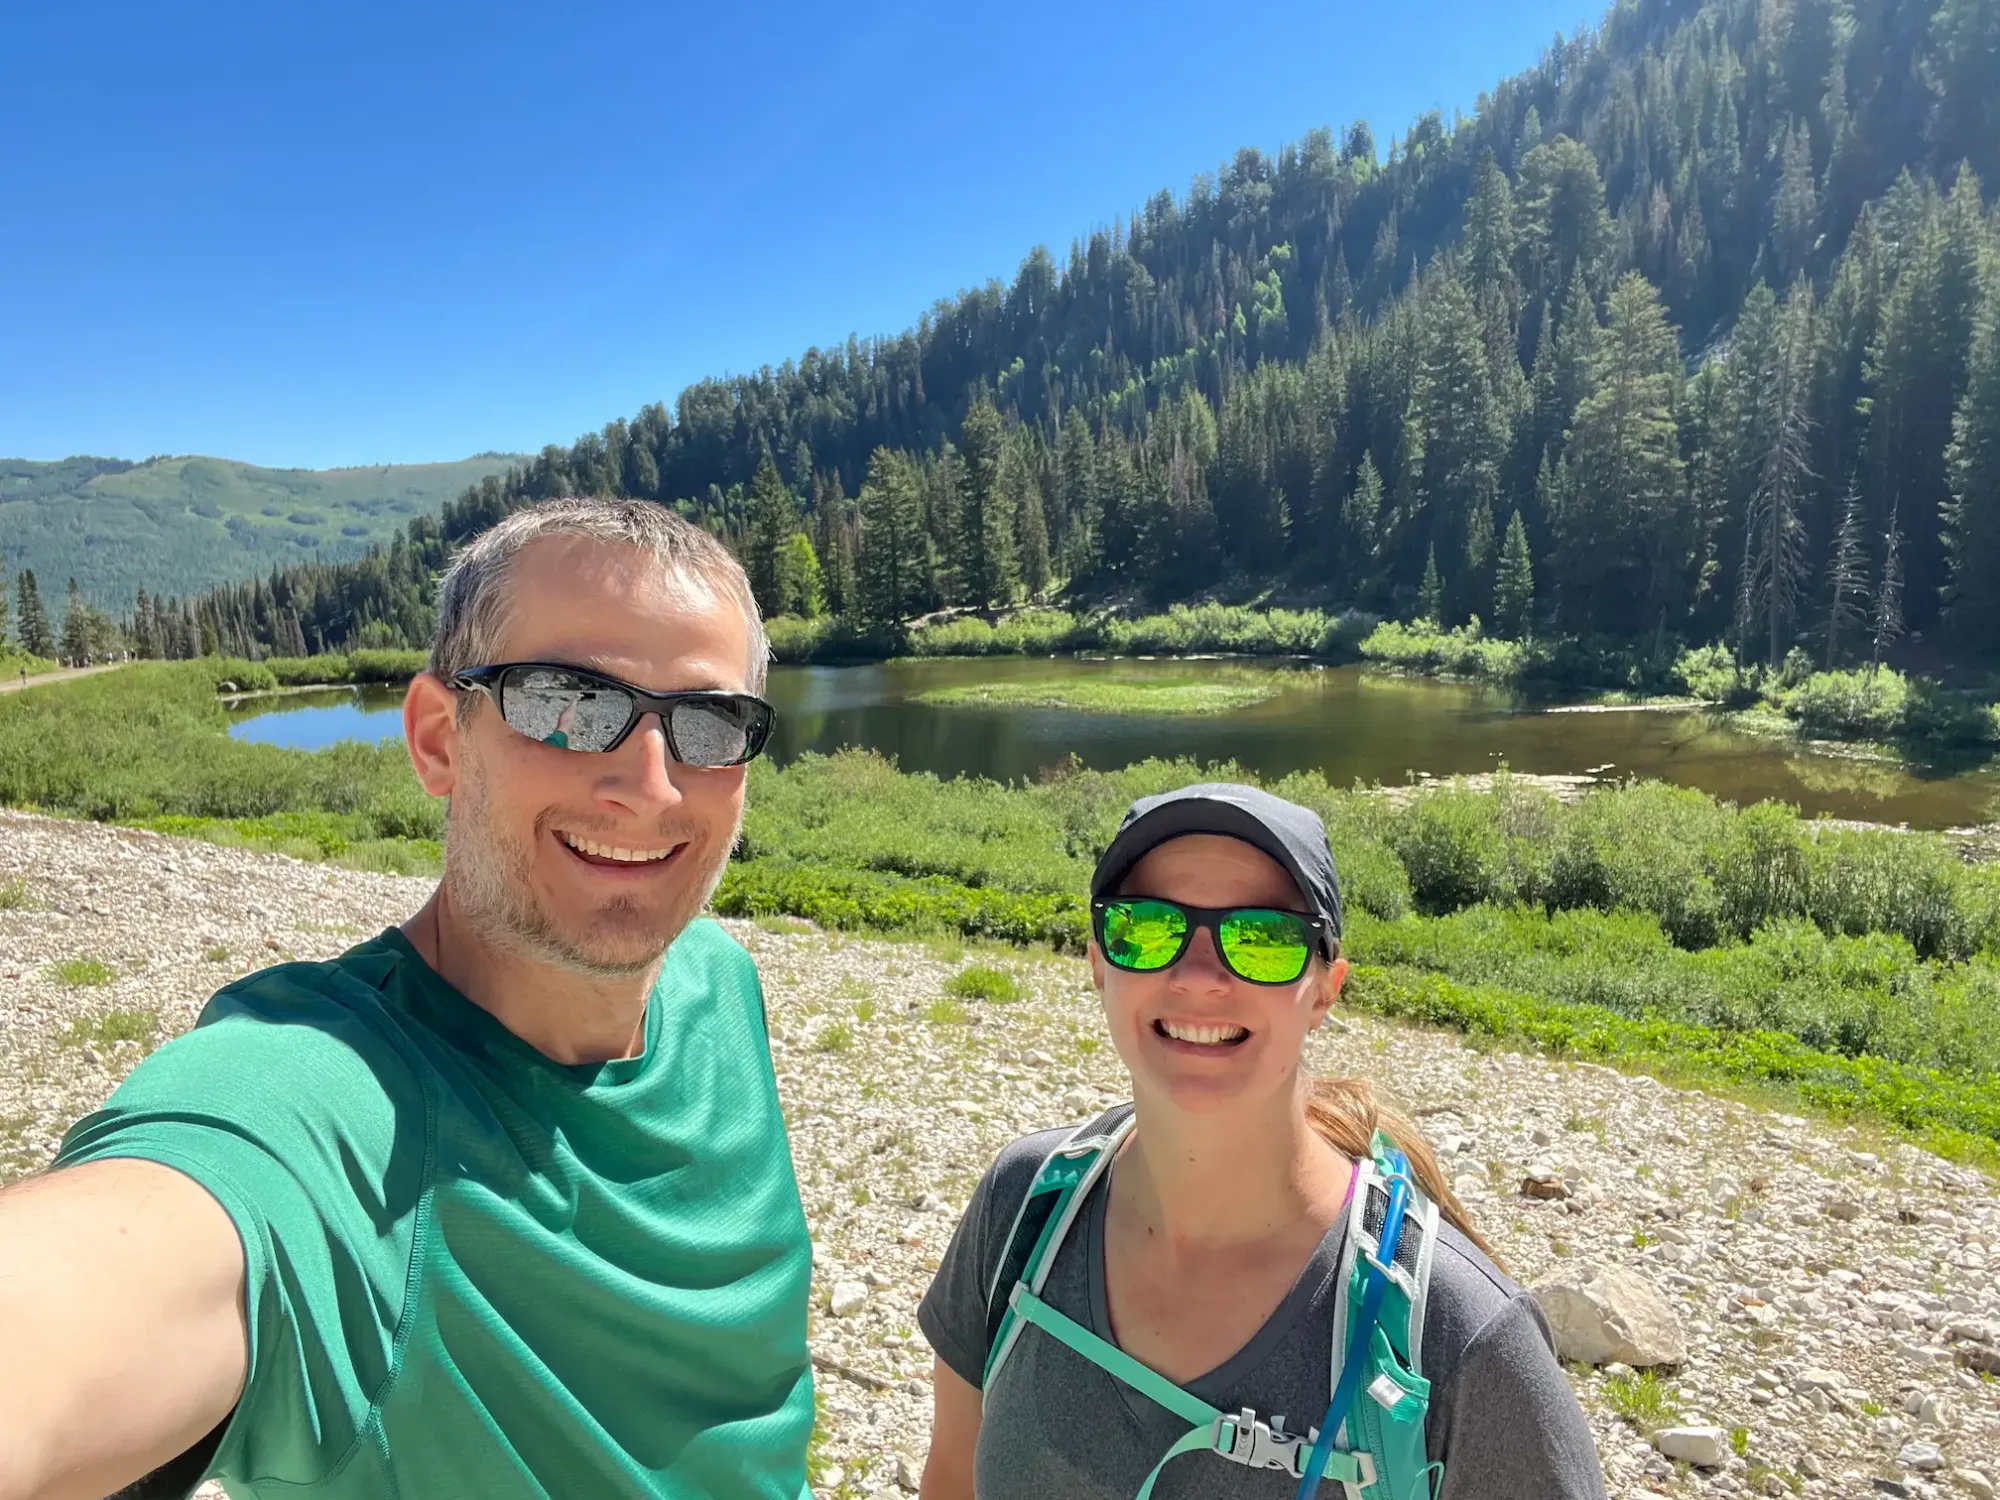 Keith is hiking with Lindsey near Solitude Mountain Resort